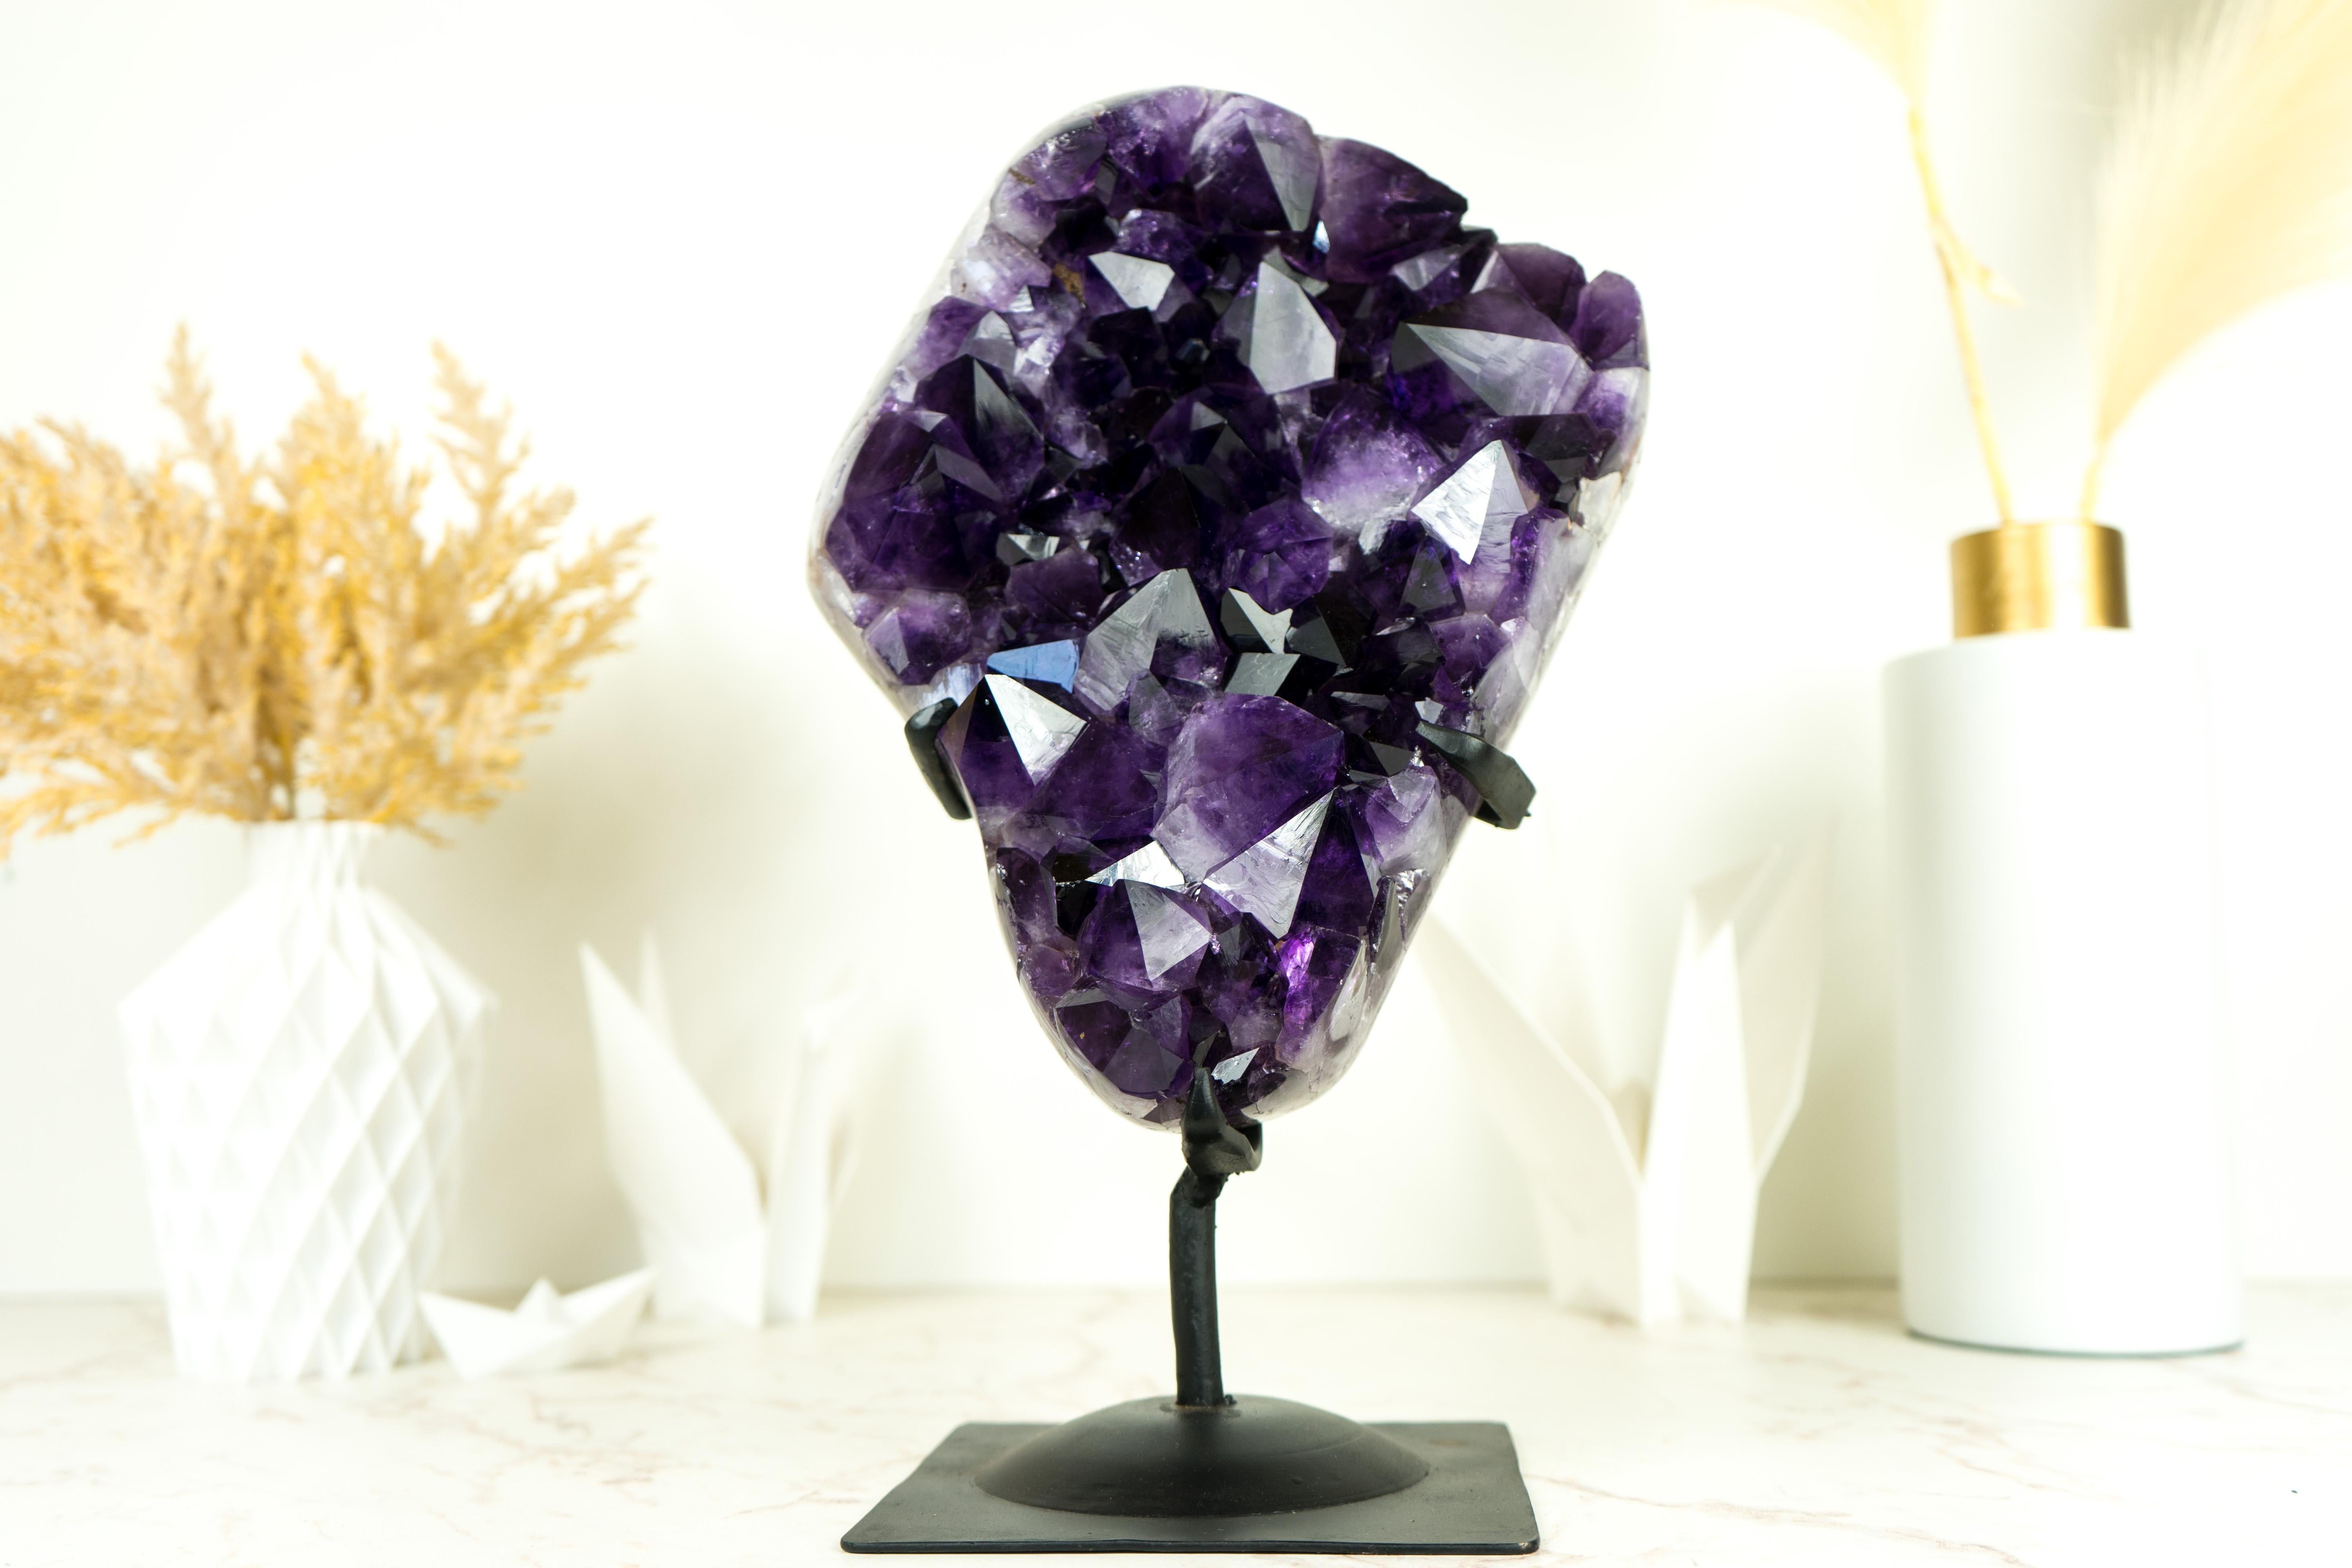 A Gallery Grade Amethyst Cluster that brings a gorgeous aesthetics, with the large, super saturated dark Amethyst Druzy. This Amethyst specimen is an exceptional addition that will infuse your space with elegance and natural art.

The color of